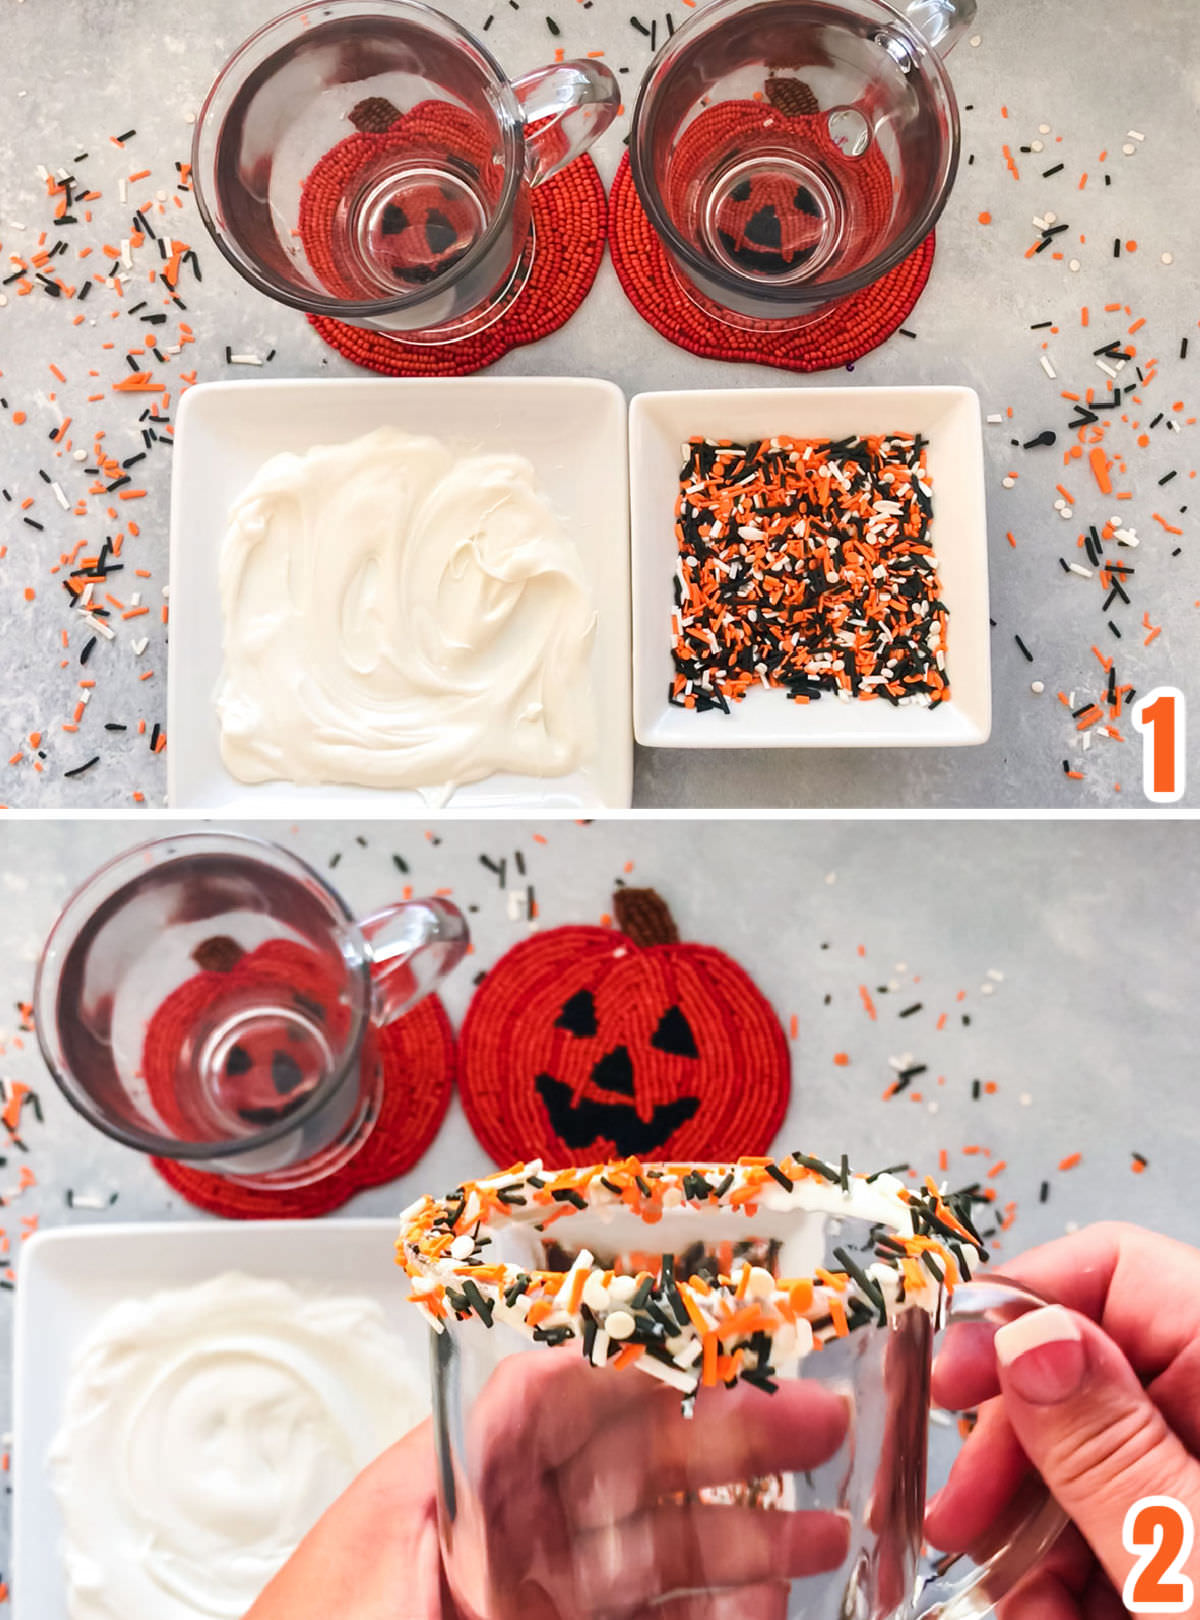 Collage image showing the steps for decorating the glass with chocolate and sprinkles.